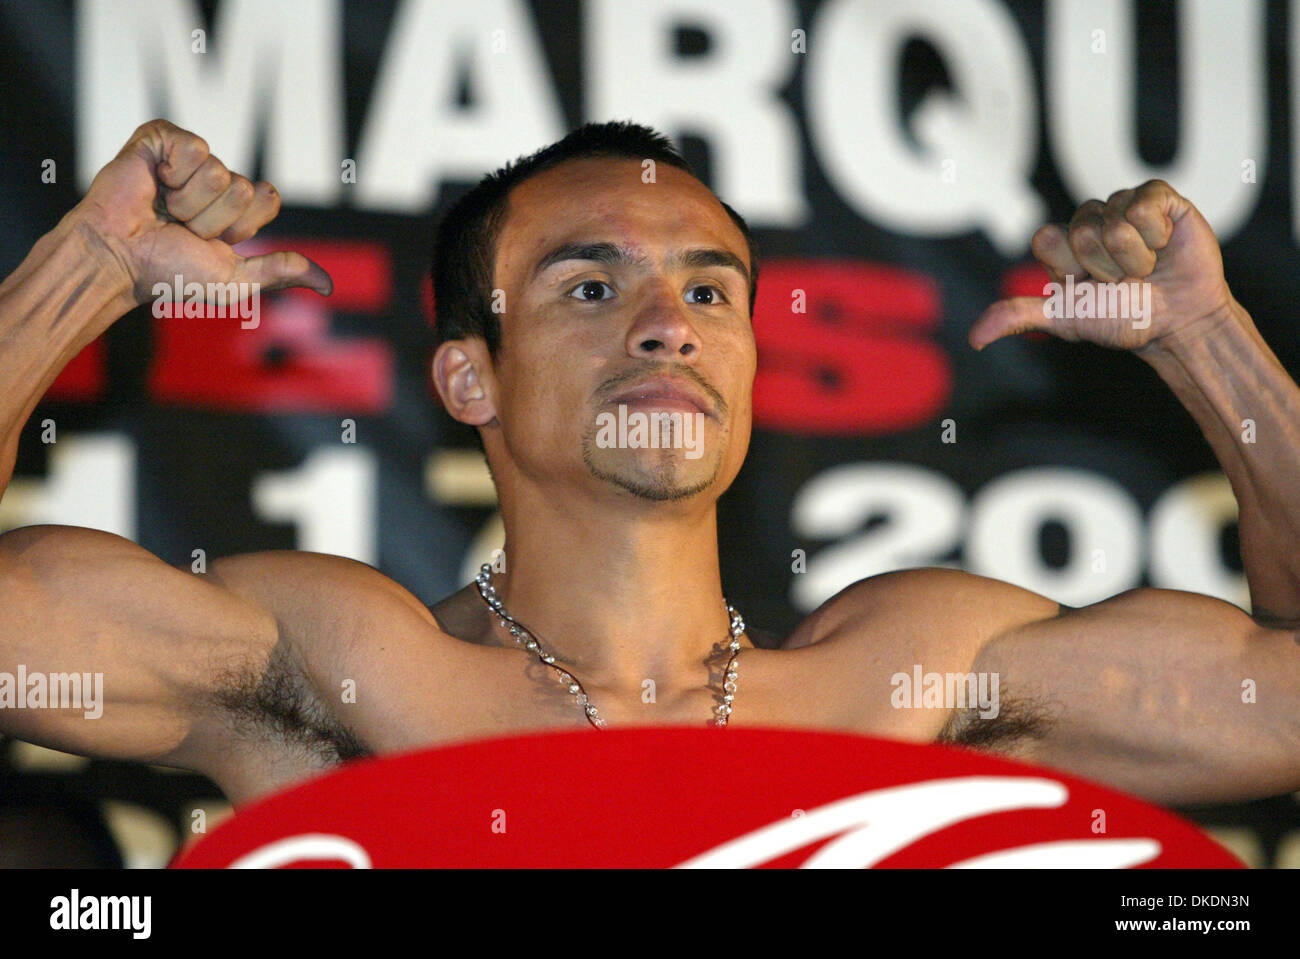 Mar 16, 2007 - Las Vegas, NV, USA - BOXING: JUAN MANUEL MARQUEZ at the  weigh-in. The best Mexican Boxers in the World Marco Antonio Barrera and  Juan Manuel Marquez are scheduled